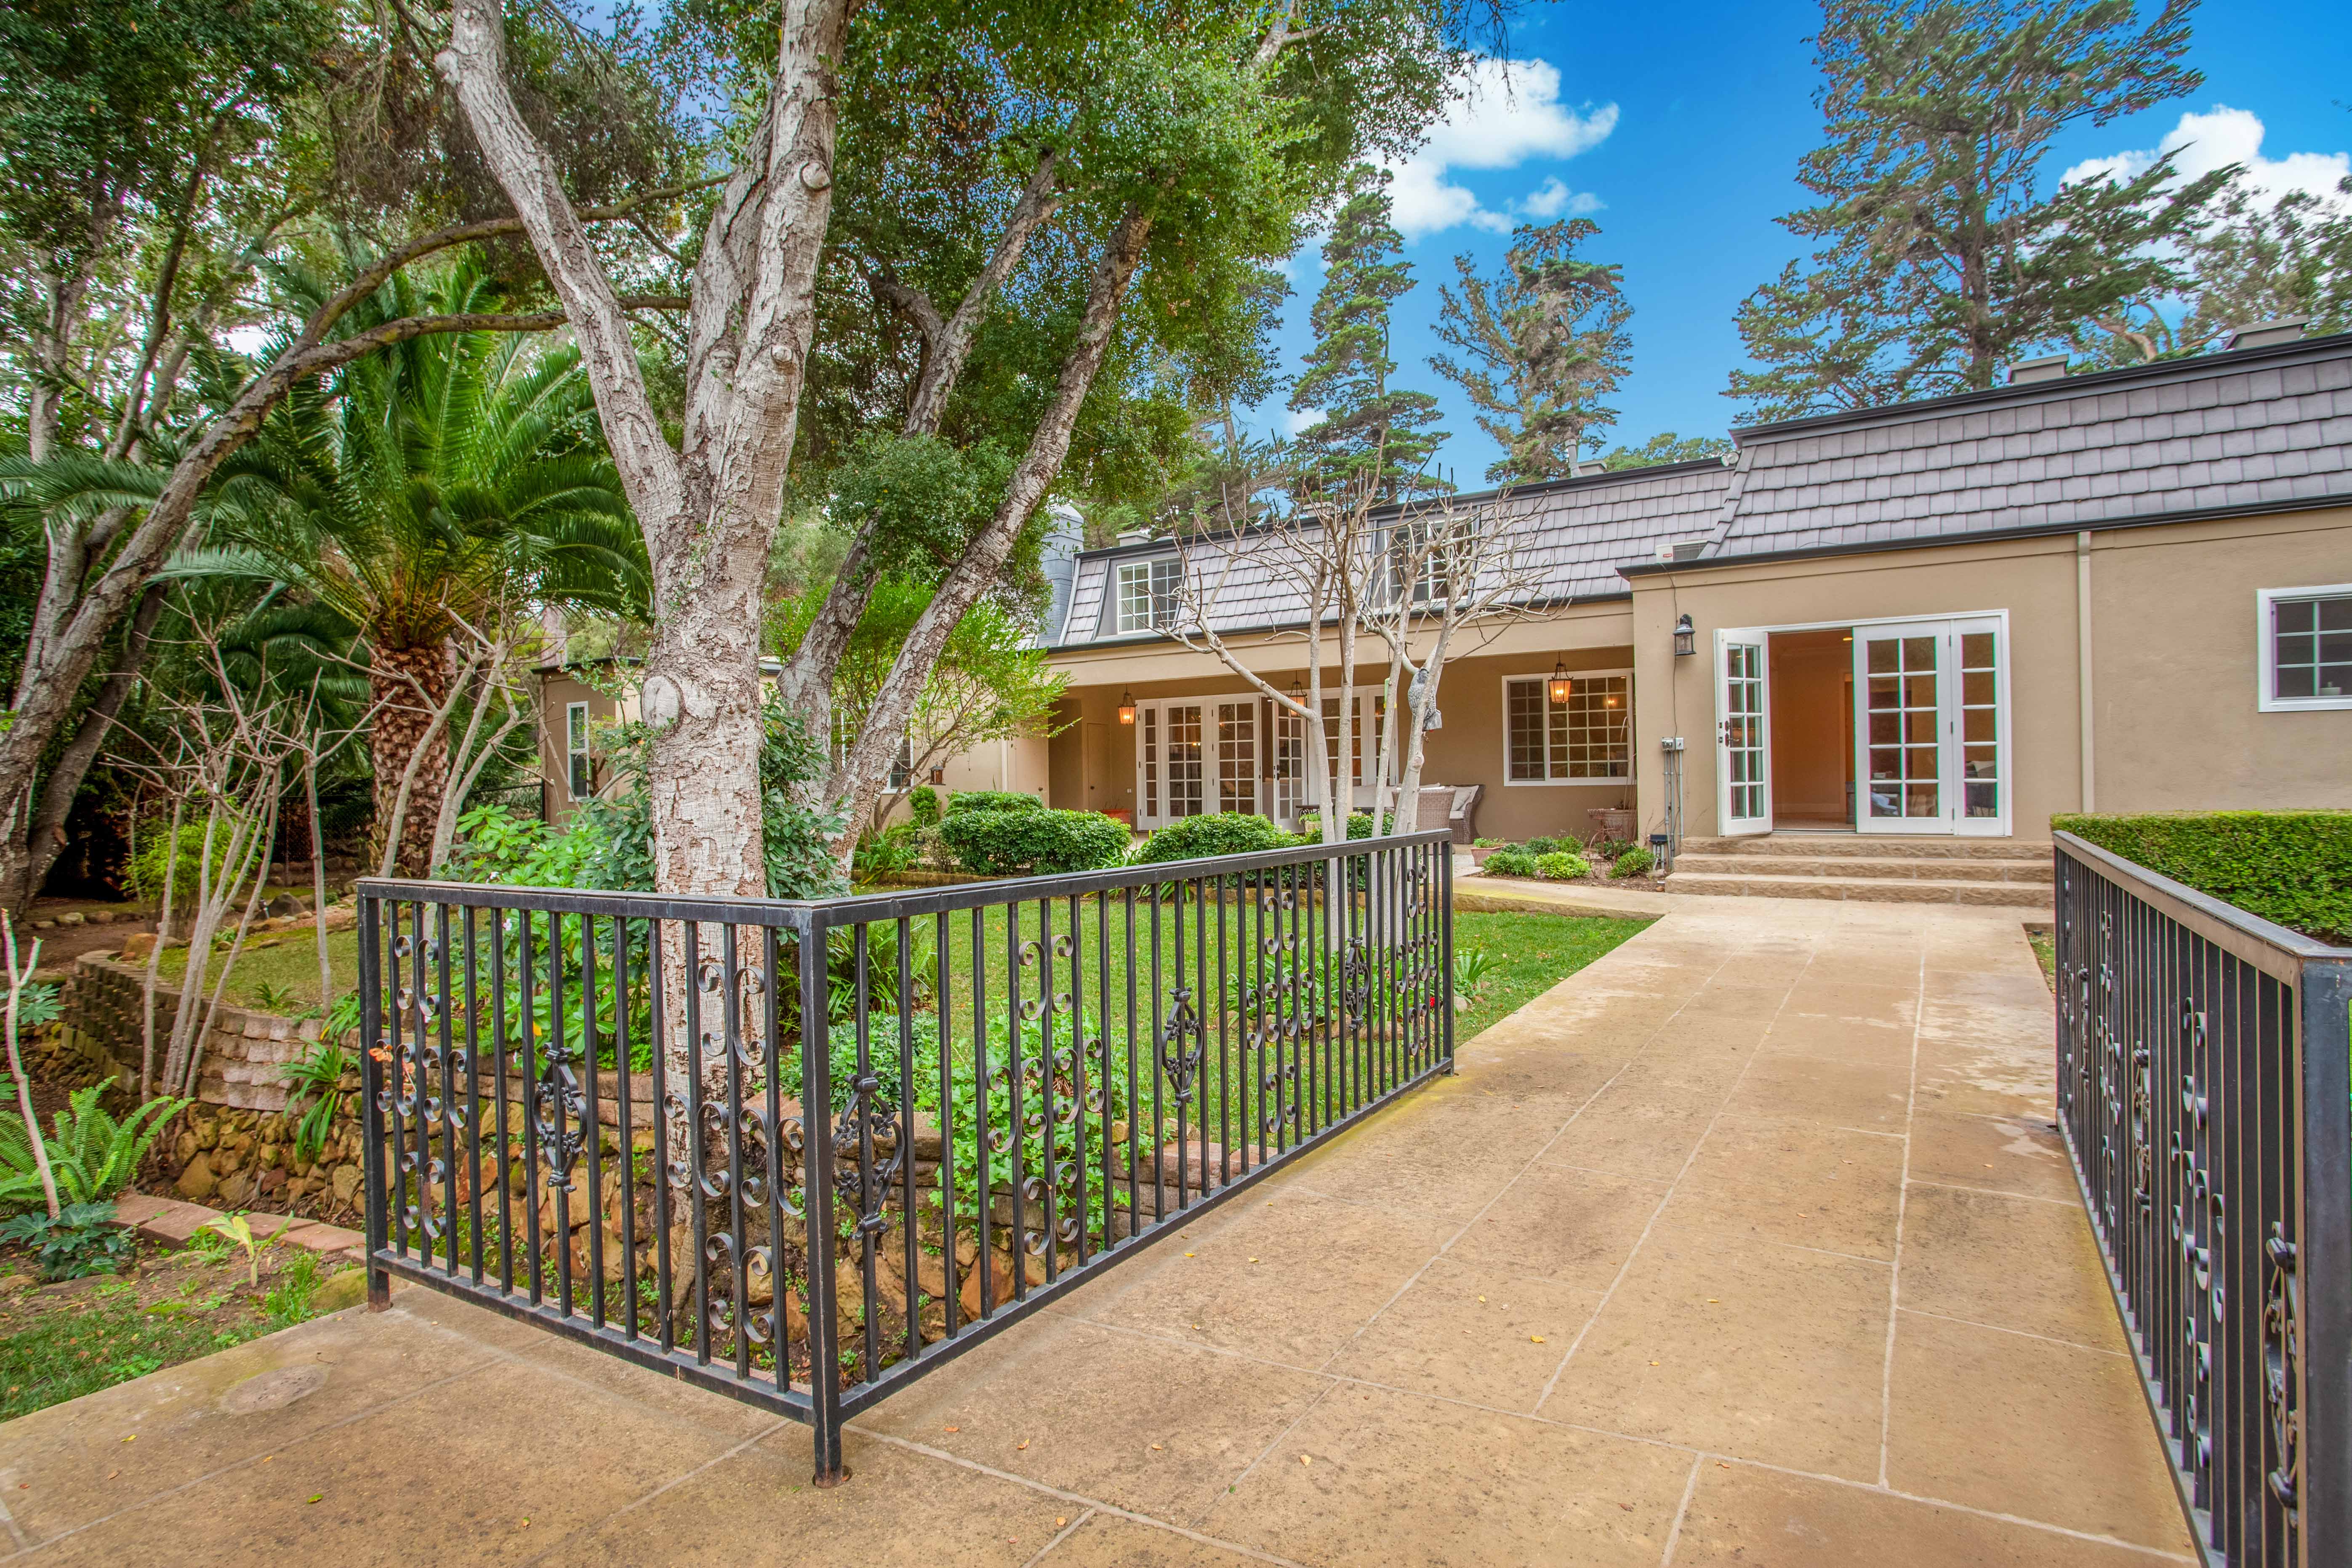 photographers specializing in real estate and homes for sale in montecito